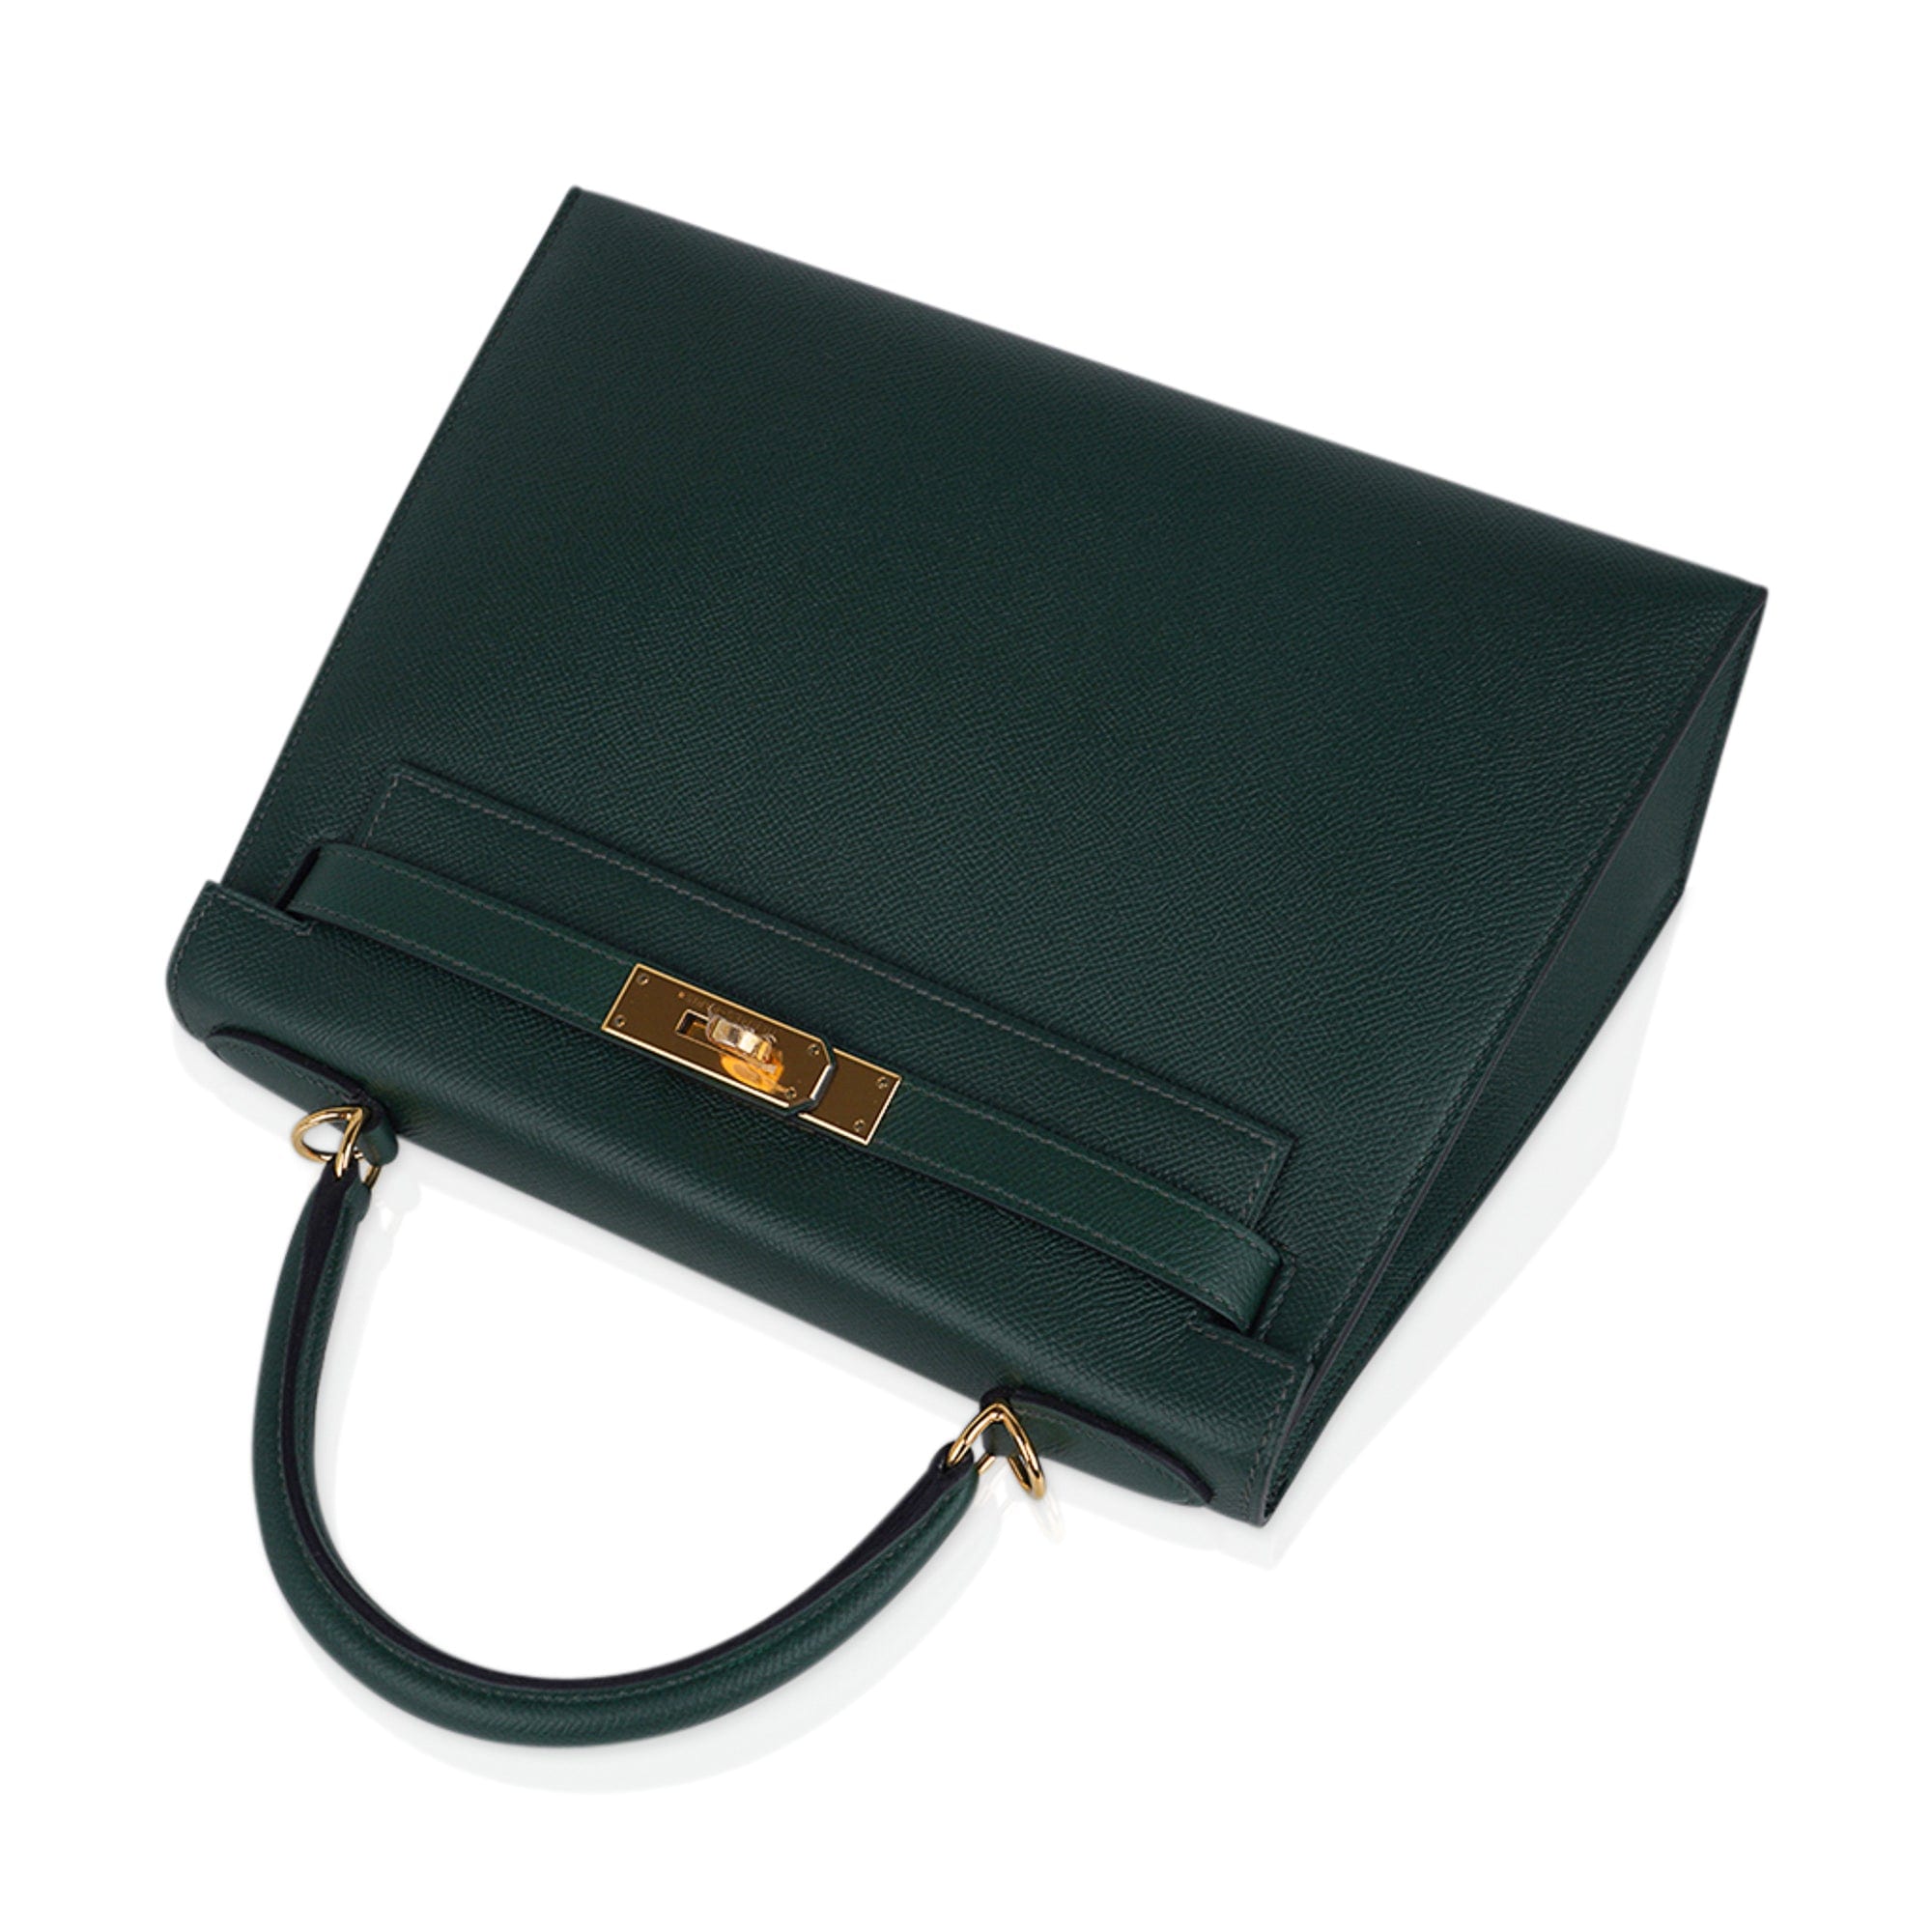 Ginza Xiaoma - Kelly 32 in Vert Anglais Epsom leather and